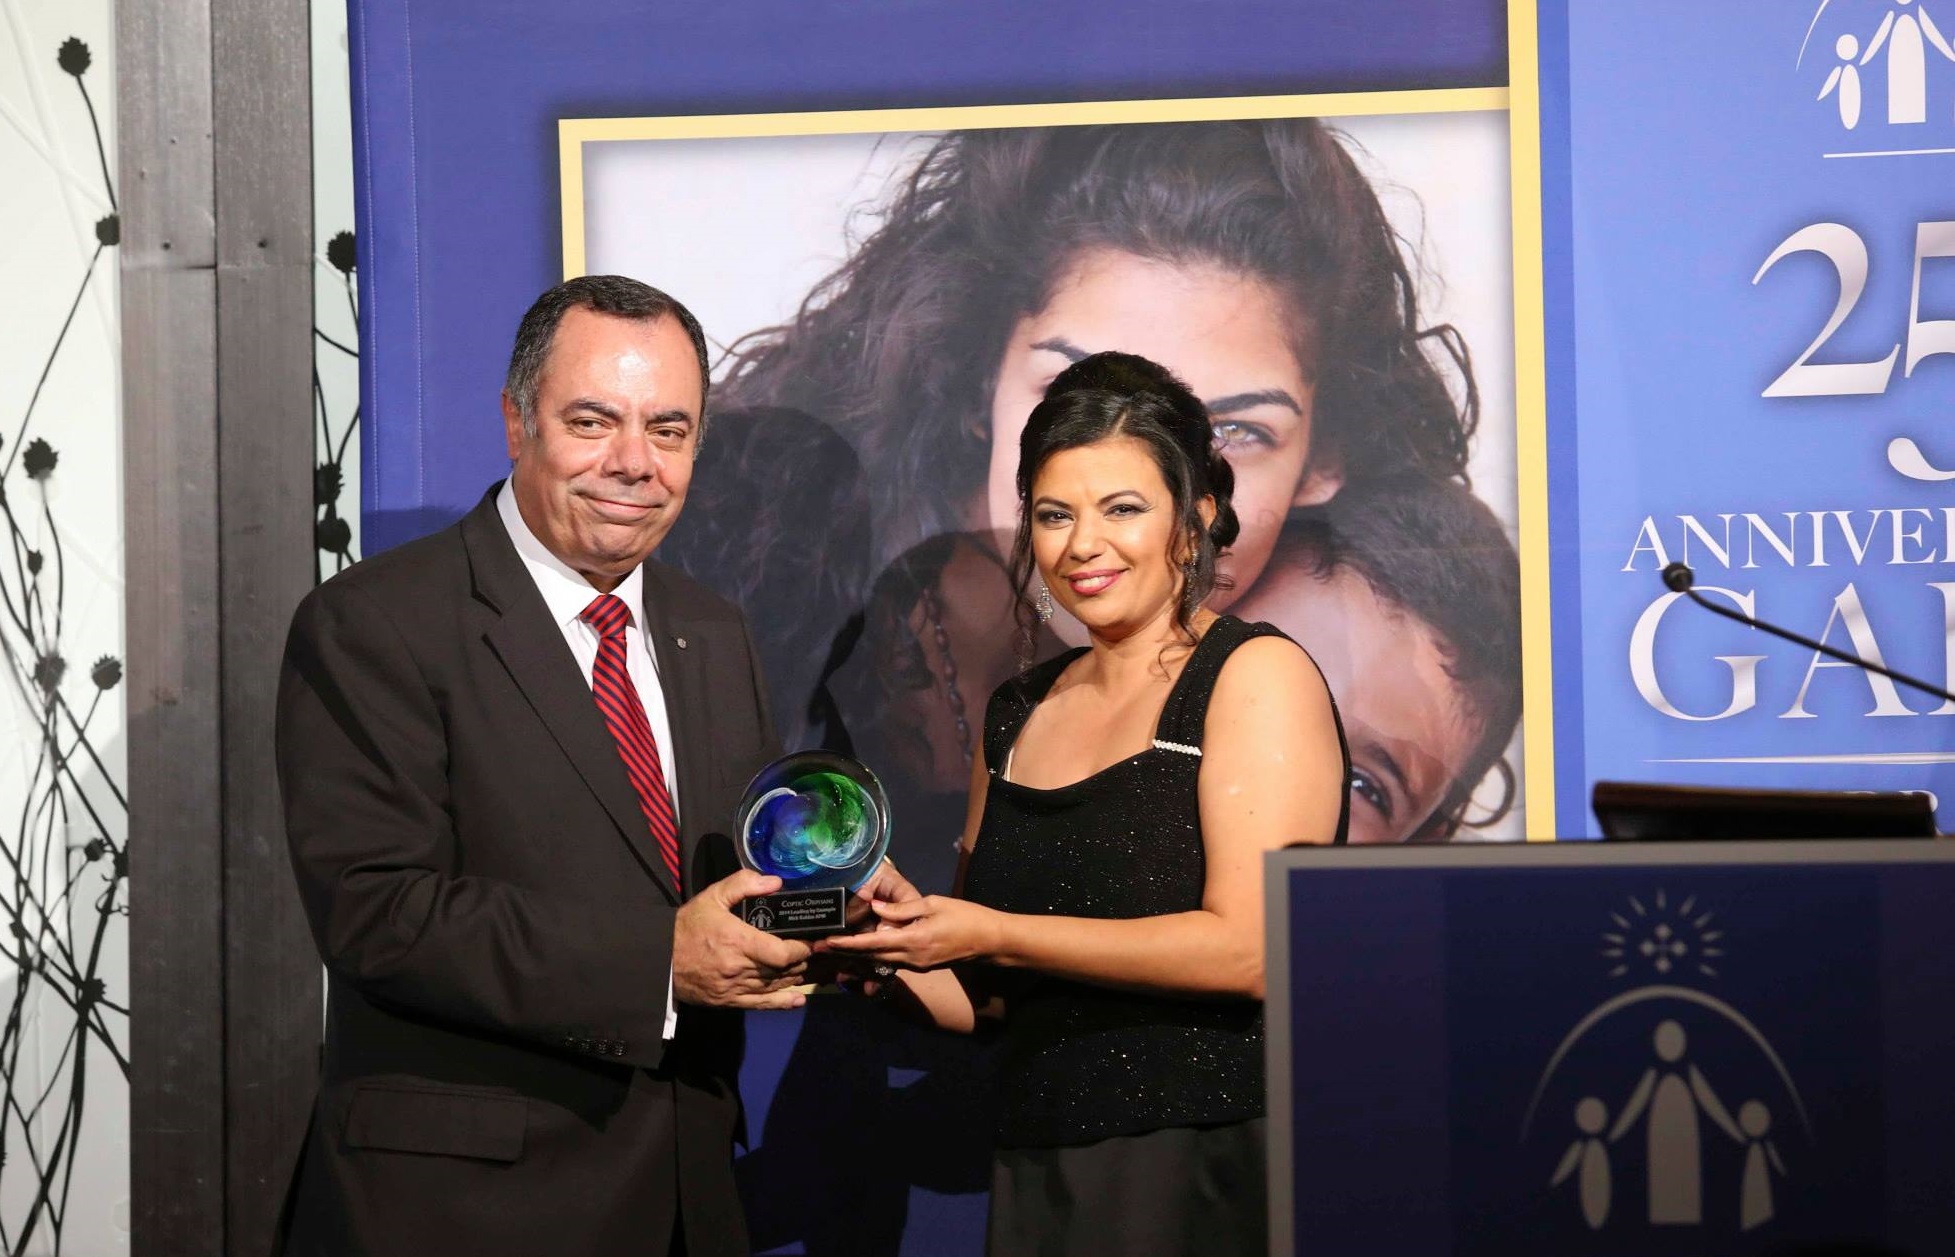 Nick Kaldas, APM, Deputy Commissioner of the NSW Police Force, receives Leading by Example Award from Coptic Orphans founder and Executive Director Nermien Riad in Lilyfield, NSW on Nov. 9, 2014